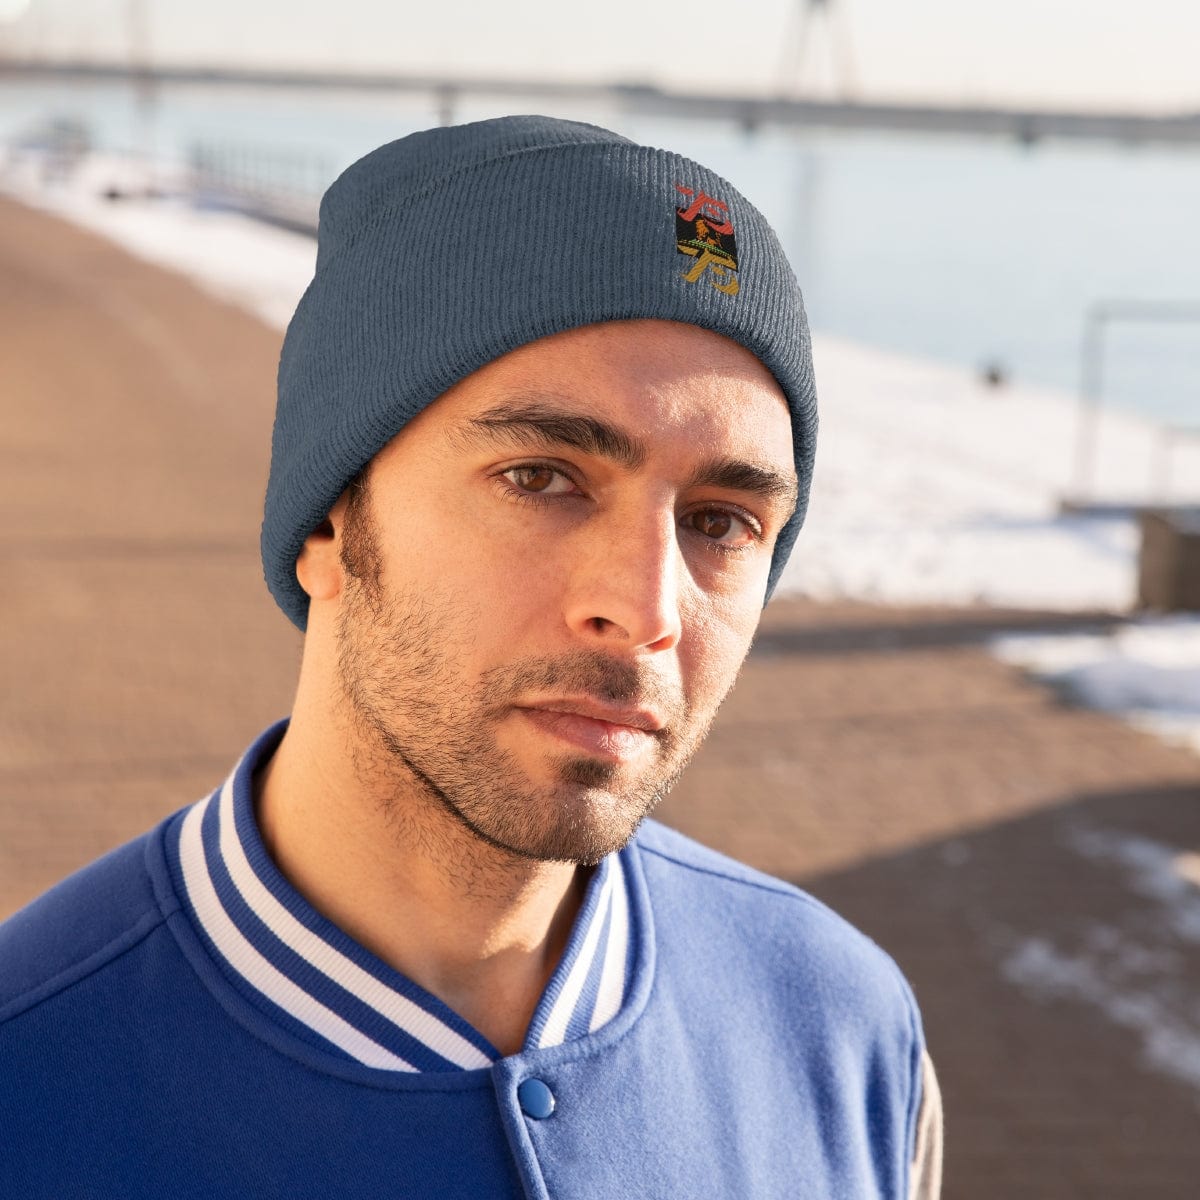 The Gamer Fresh | Lucky 75th Avenue | Knitted Beanie Hat